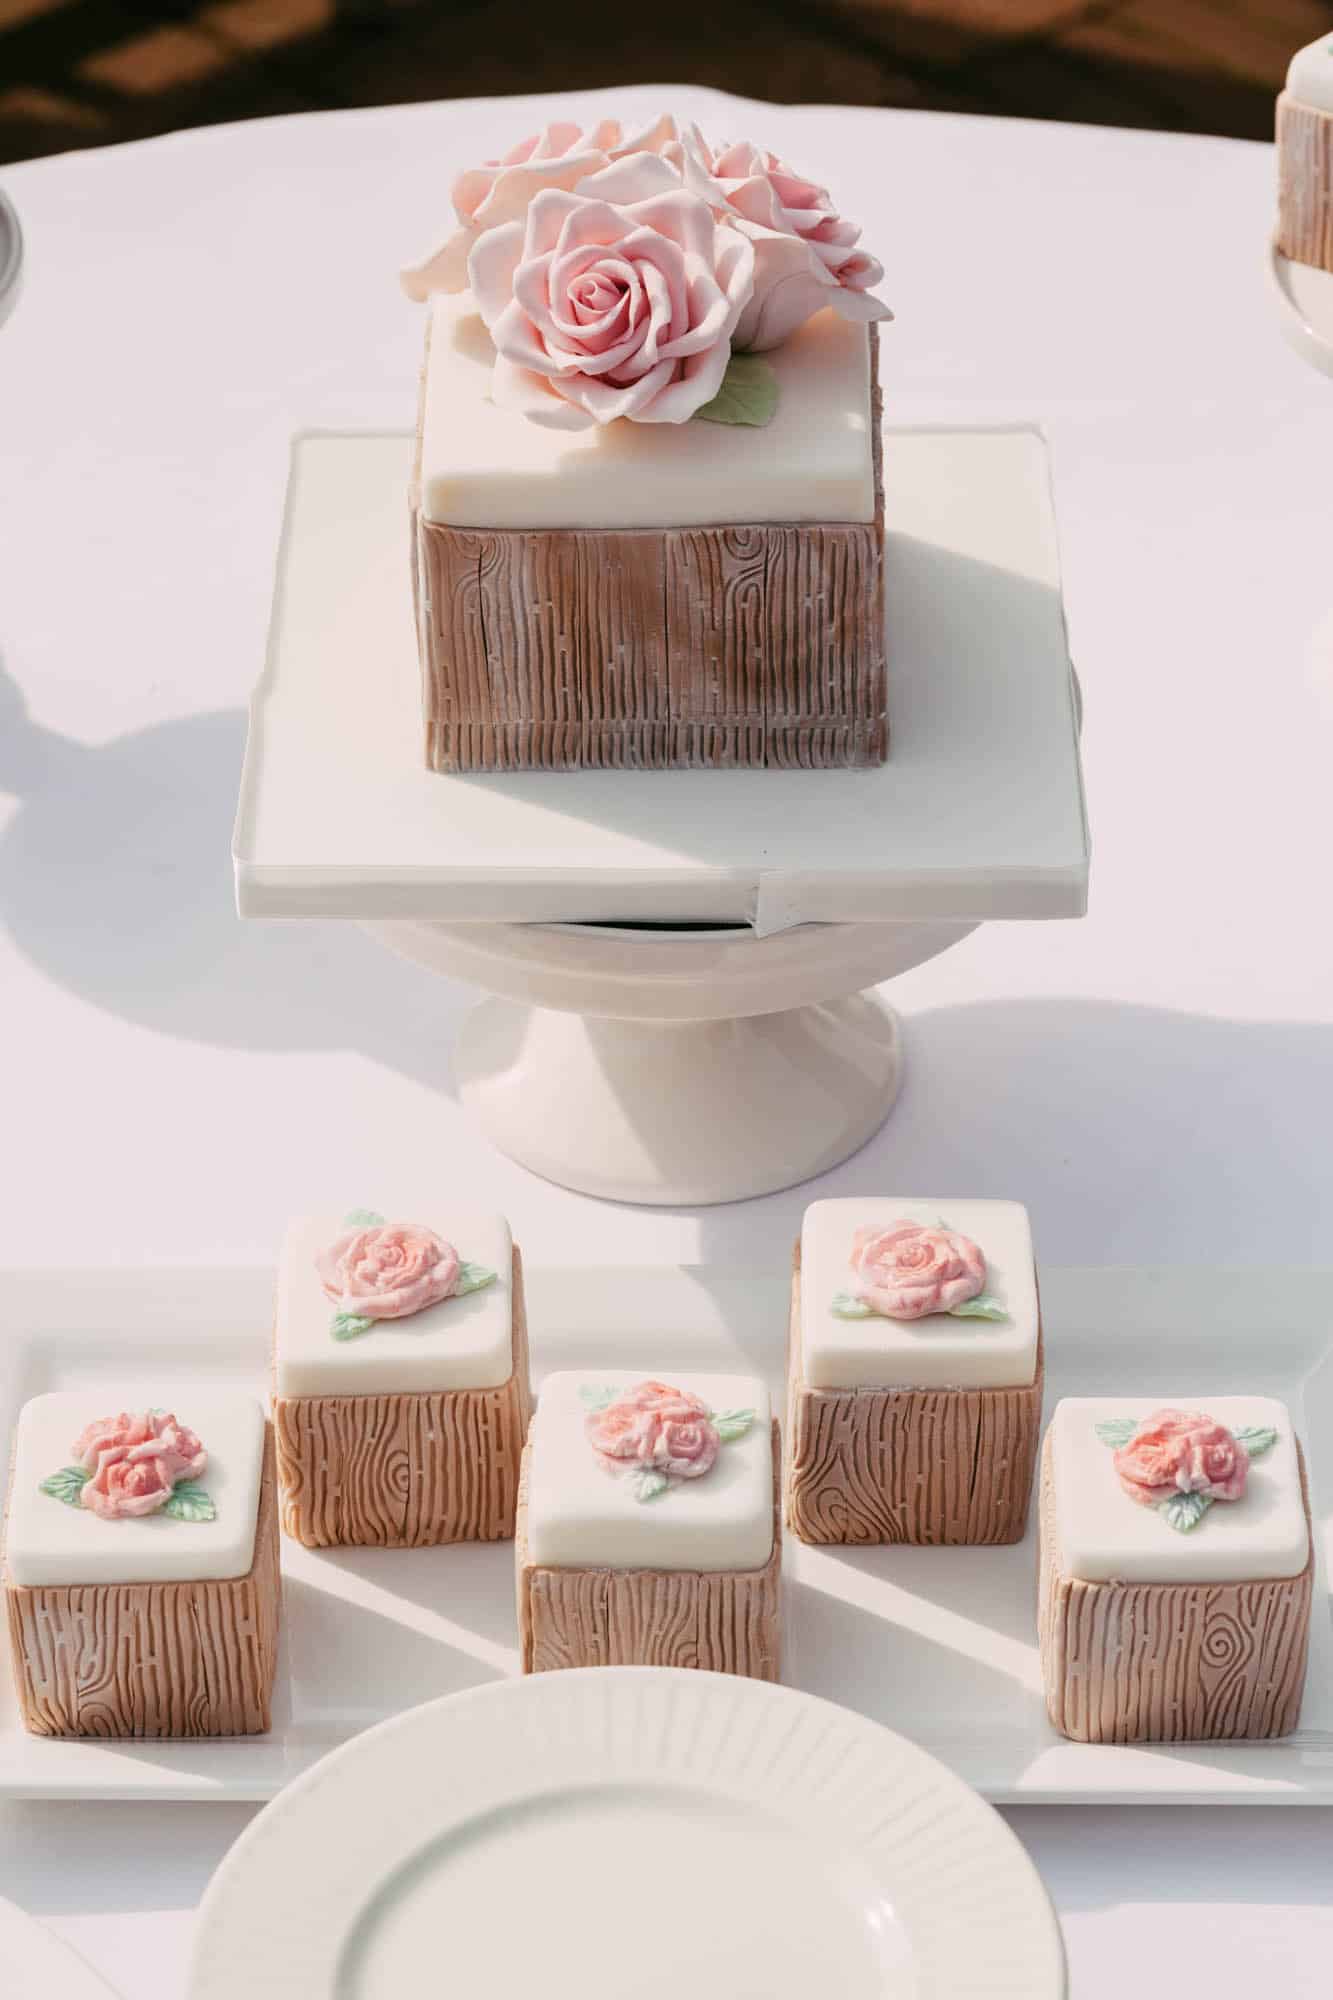 A white cake with pink roses on a white plate, perfect for wedding cakes.